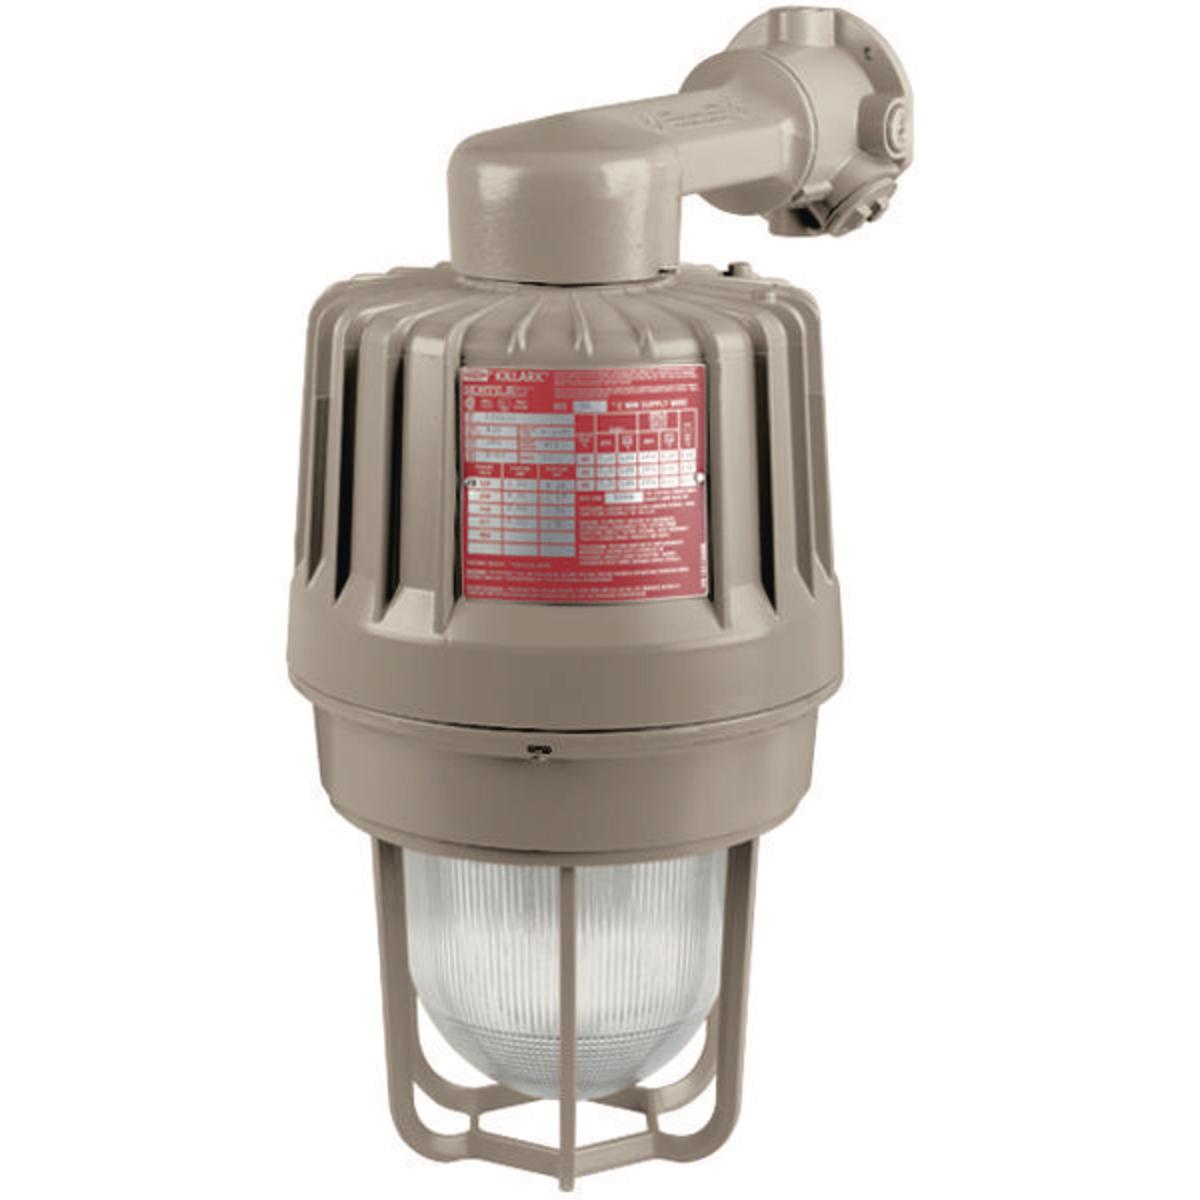 Hubbell EZS255B3G HID 250W 480V High Pressure Sodium 1" Wall Mount with Guard  ; Three light sources – High Pressure Sodium (50-400W), Metal Halide (70-400W) and Pulse Start Metal Halide (175-400W) ; Mounting choice –Pendant, ceiling, 25˚ stanchion or 90˚ wall mount, all w